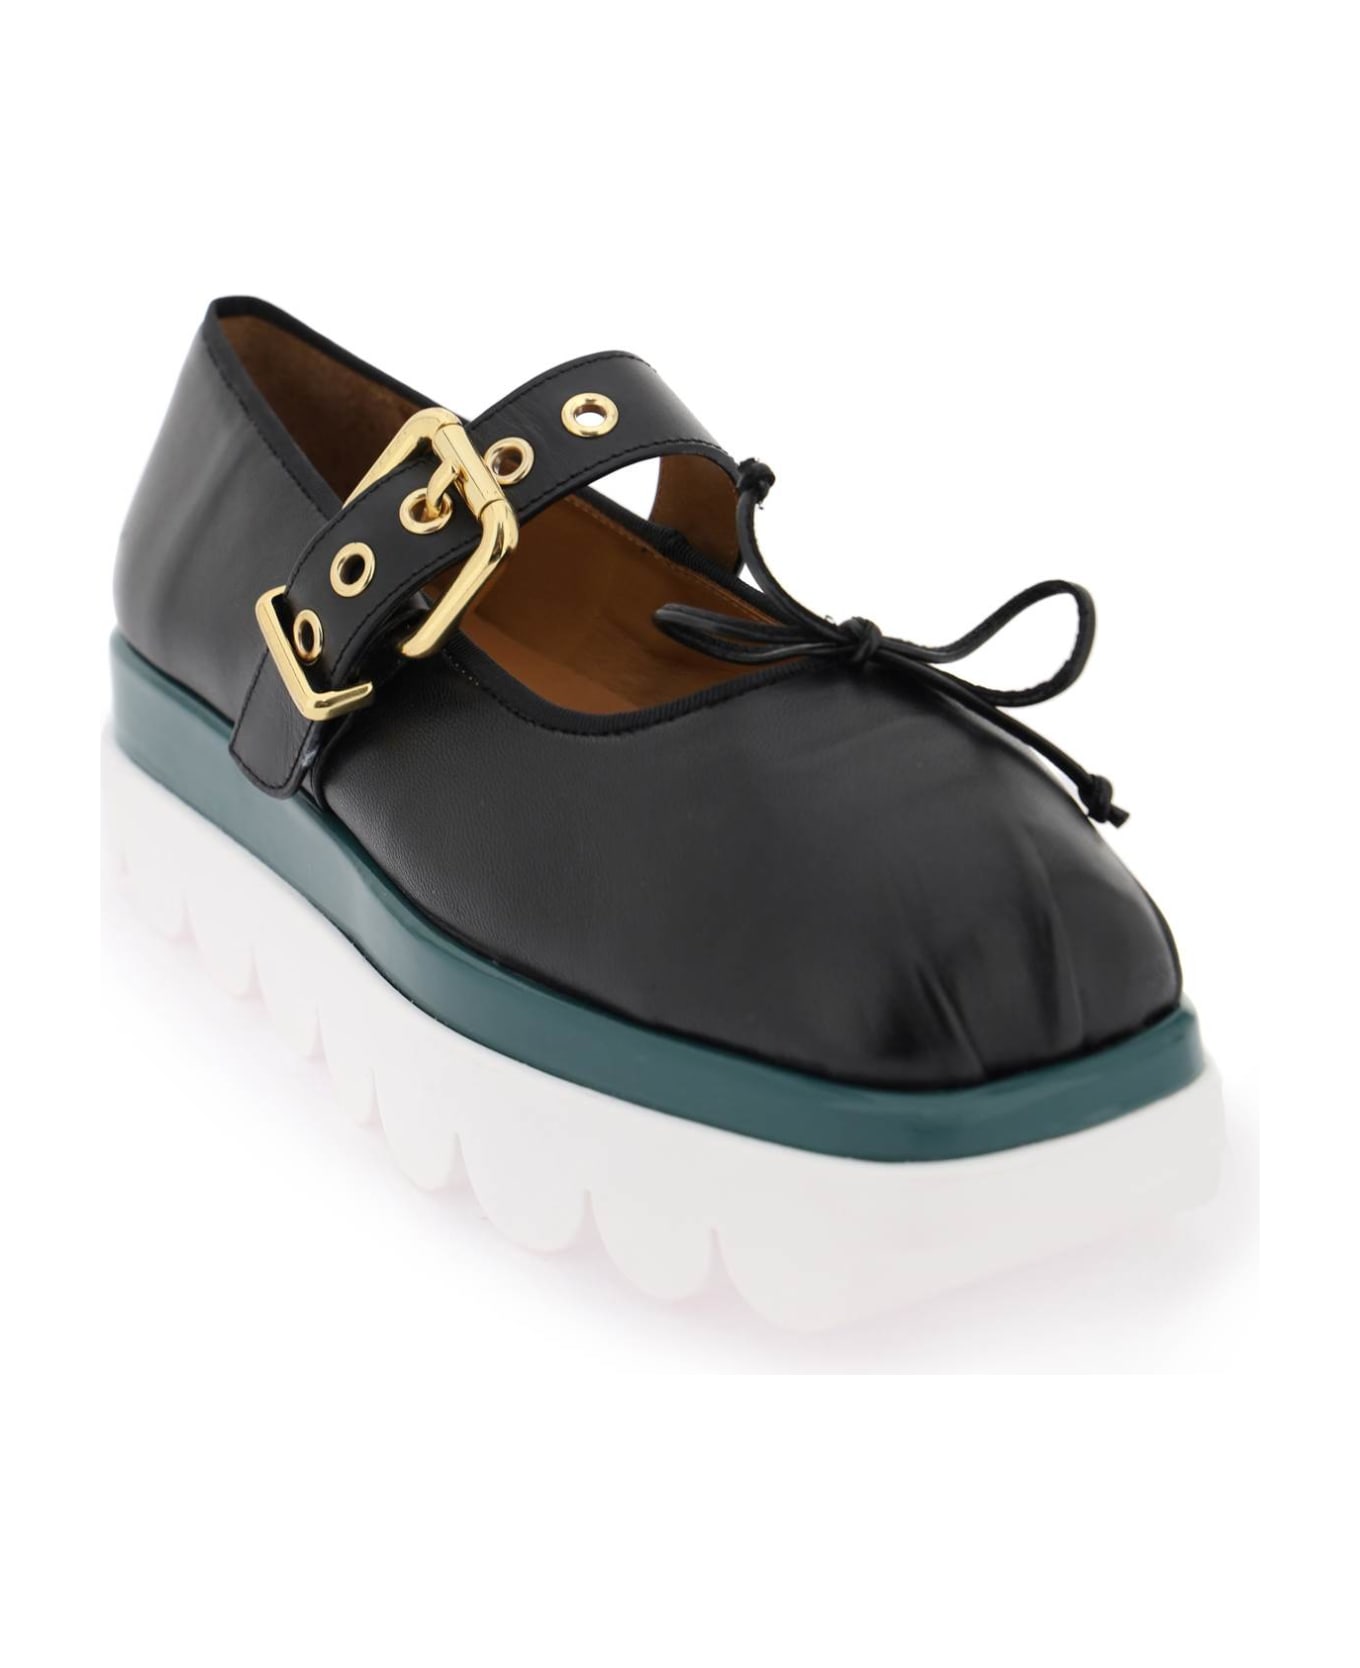 Marni Nappa Leather Mary Jane With Notched Sole - Black レースアップシューズ